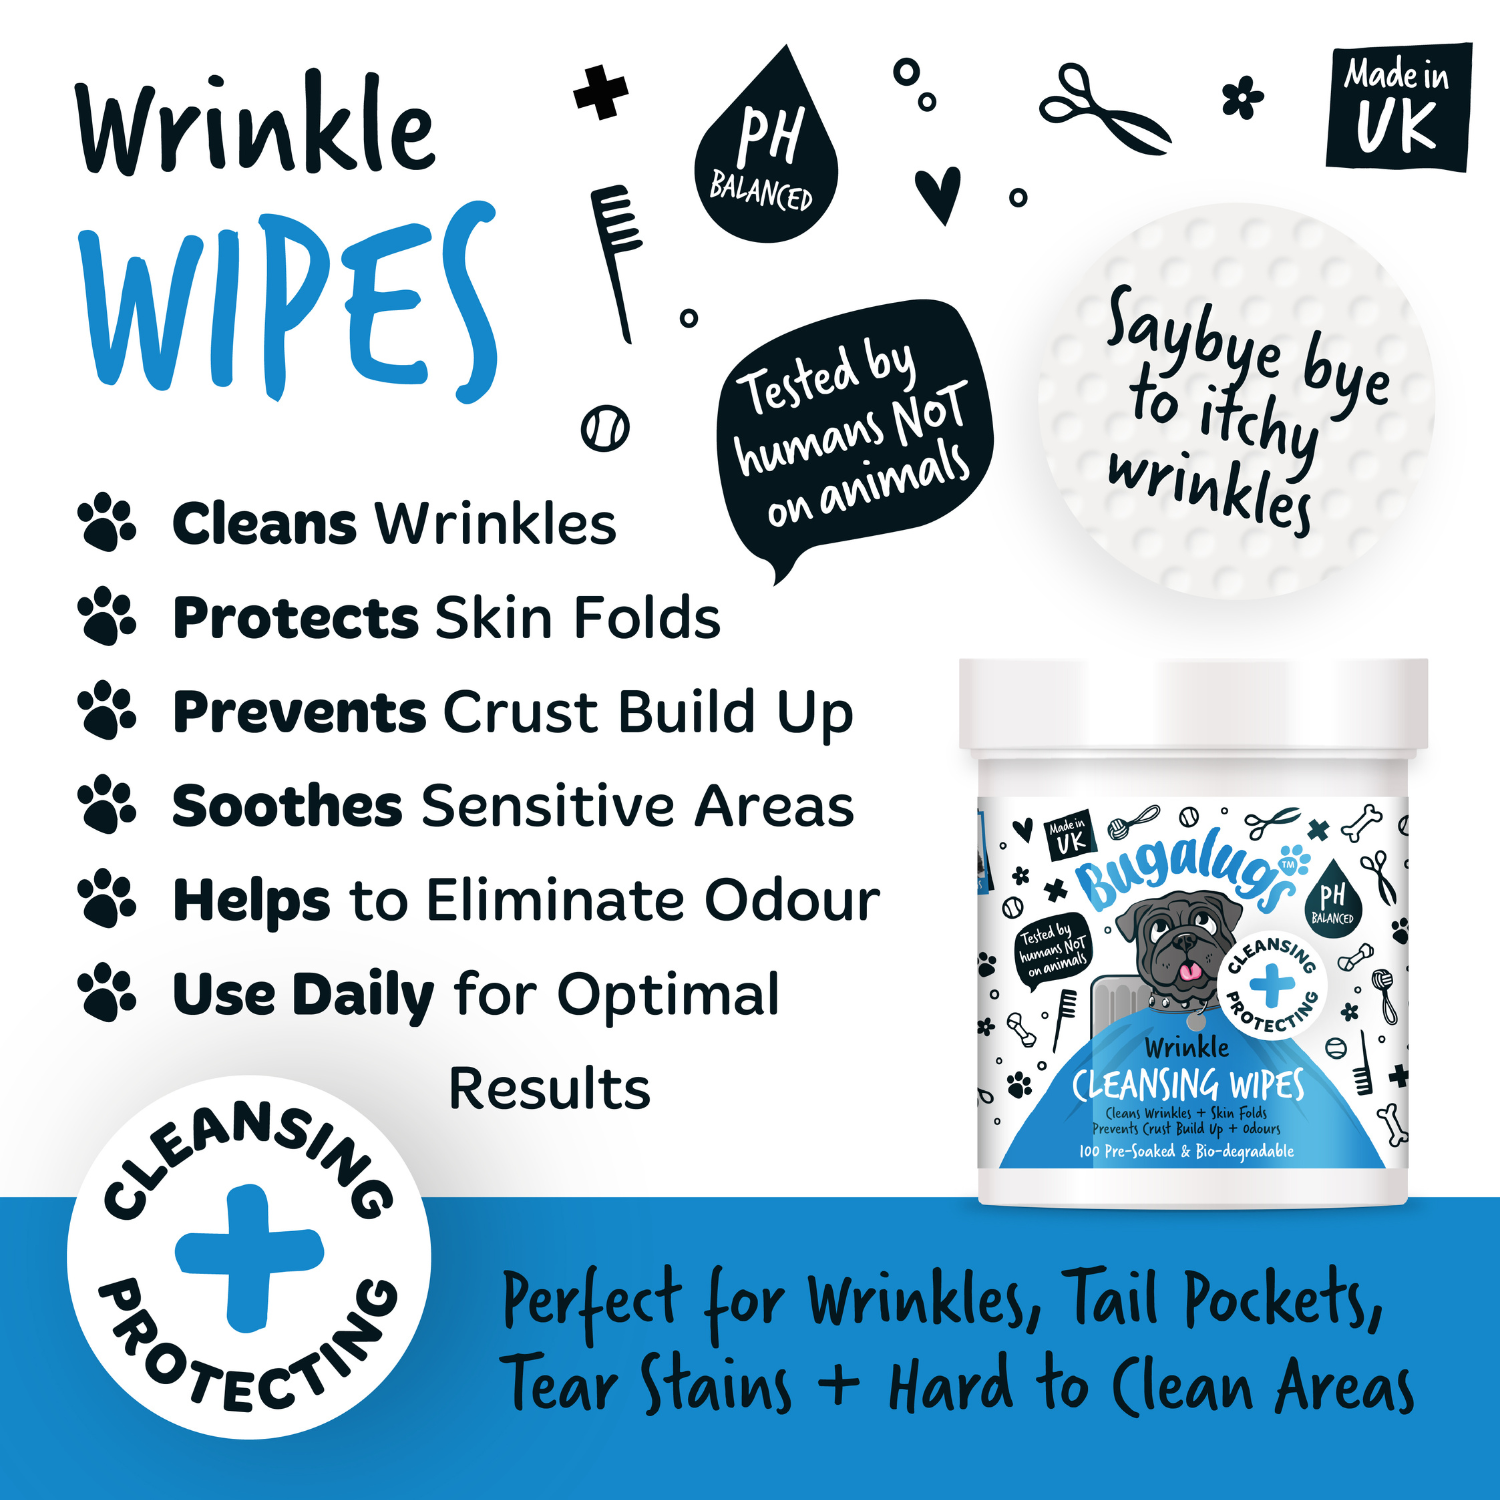 Bugalugs Wrinkle Cleansing Wipes - Key benefits